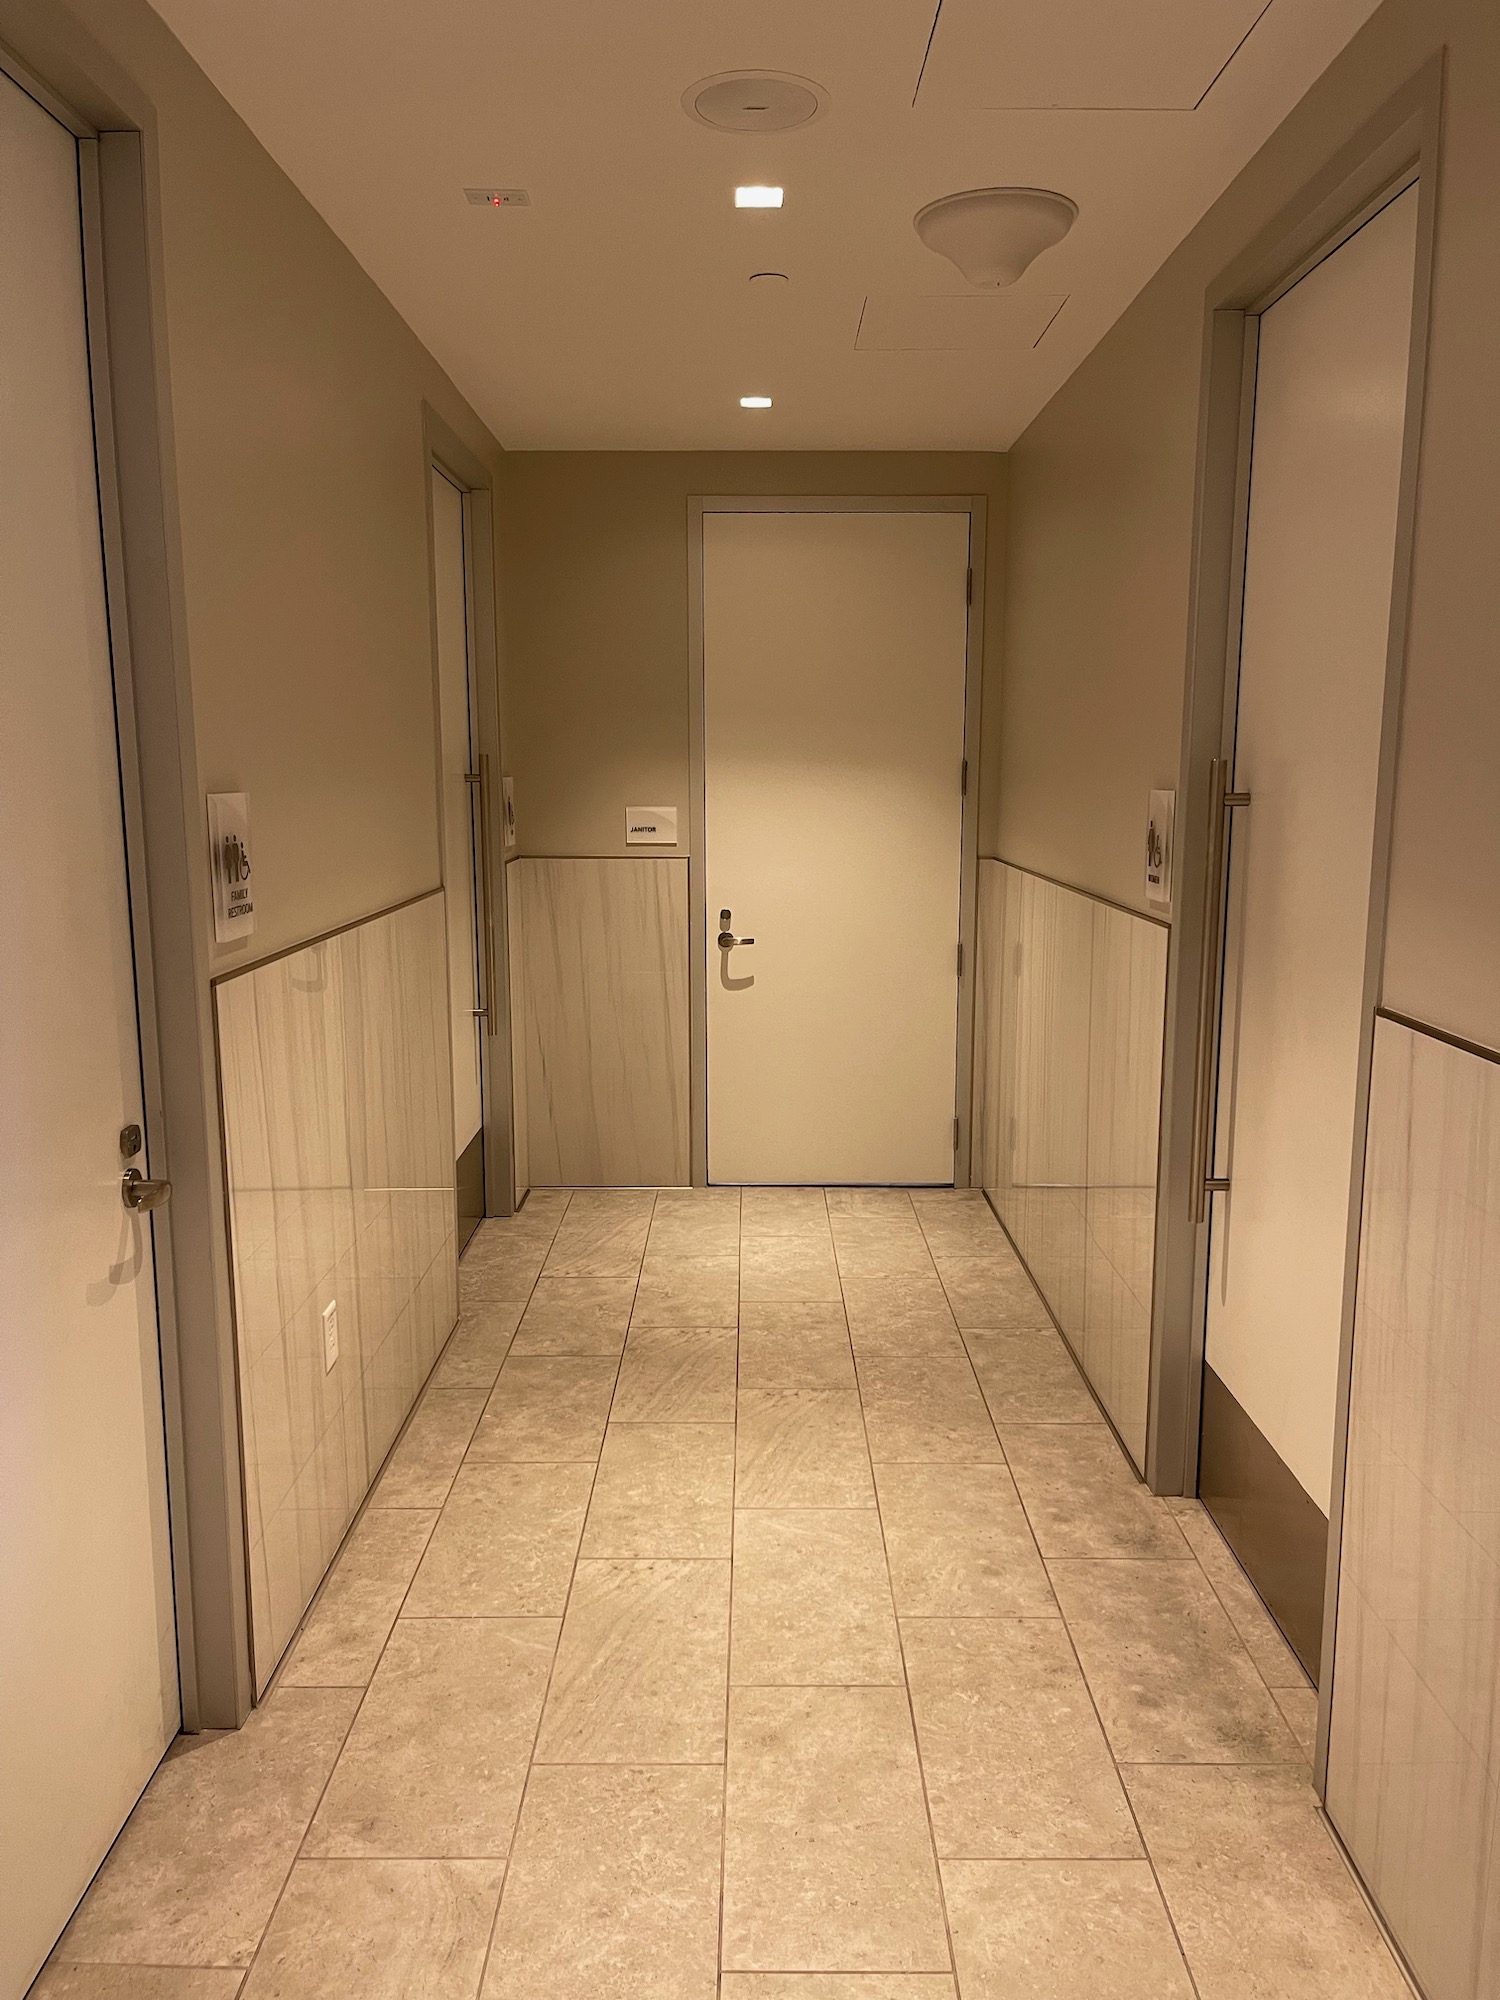 a hallway with doors and tile walls